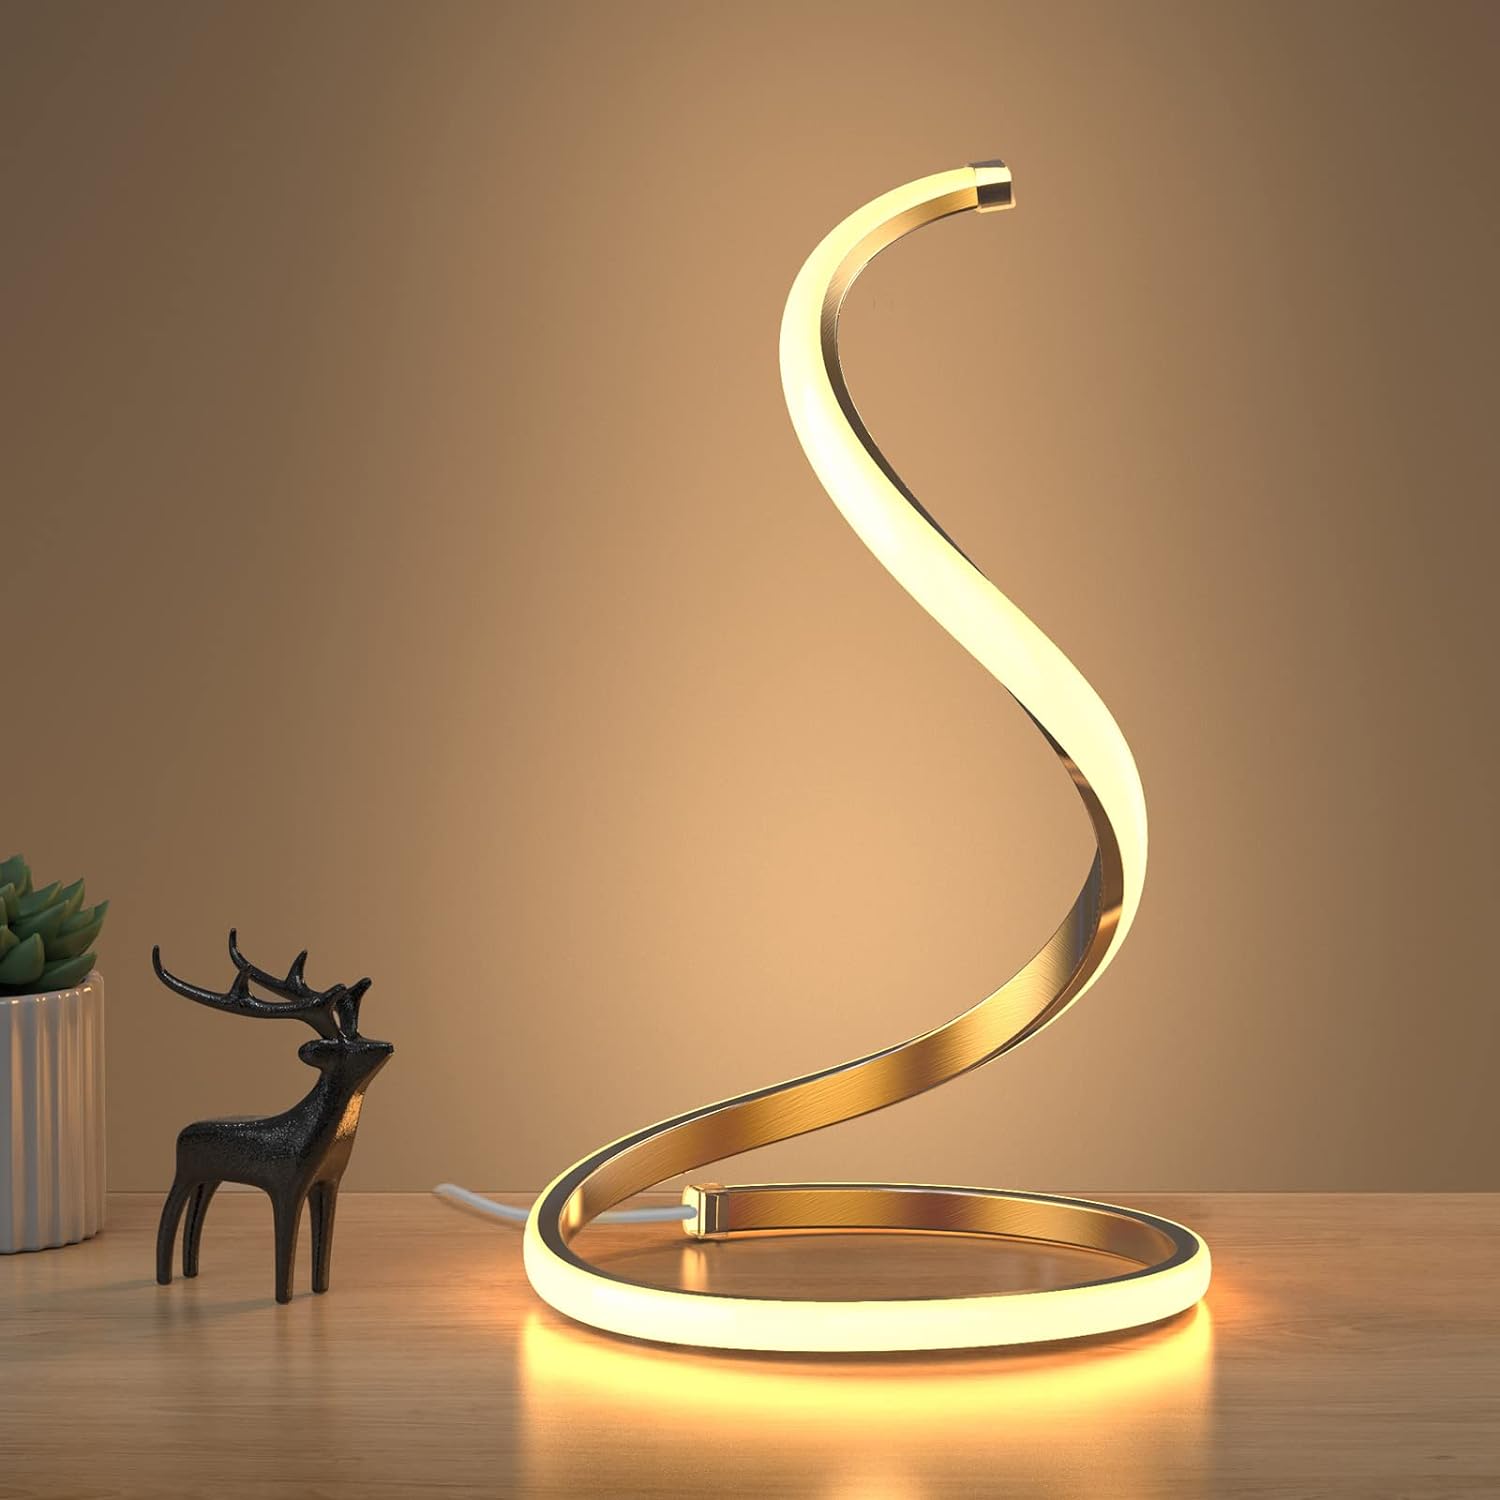 NUR Spiral LED Table Lamp, Modern 3 Colors Dimmable Desk Lamp with Minimalist Lighting Design & Touch Controller, Creative Stylish Smart Lamp for Bedroom, Office, Home (Gold)